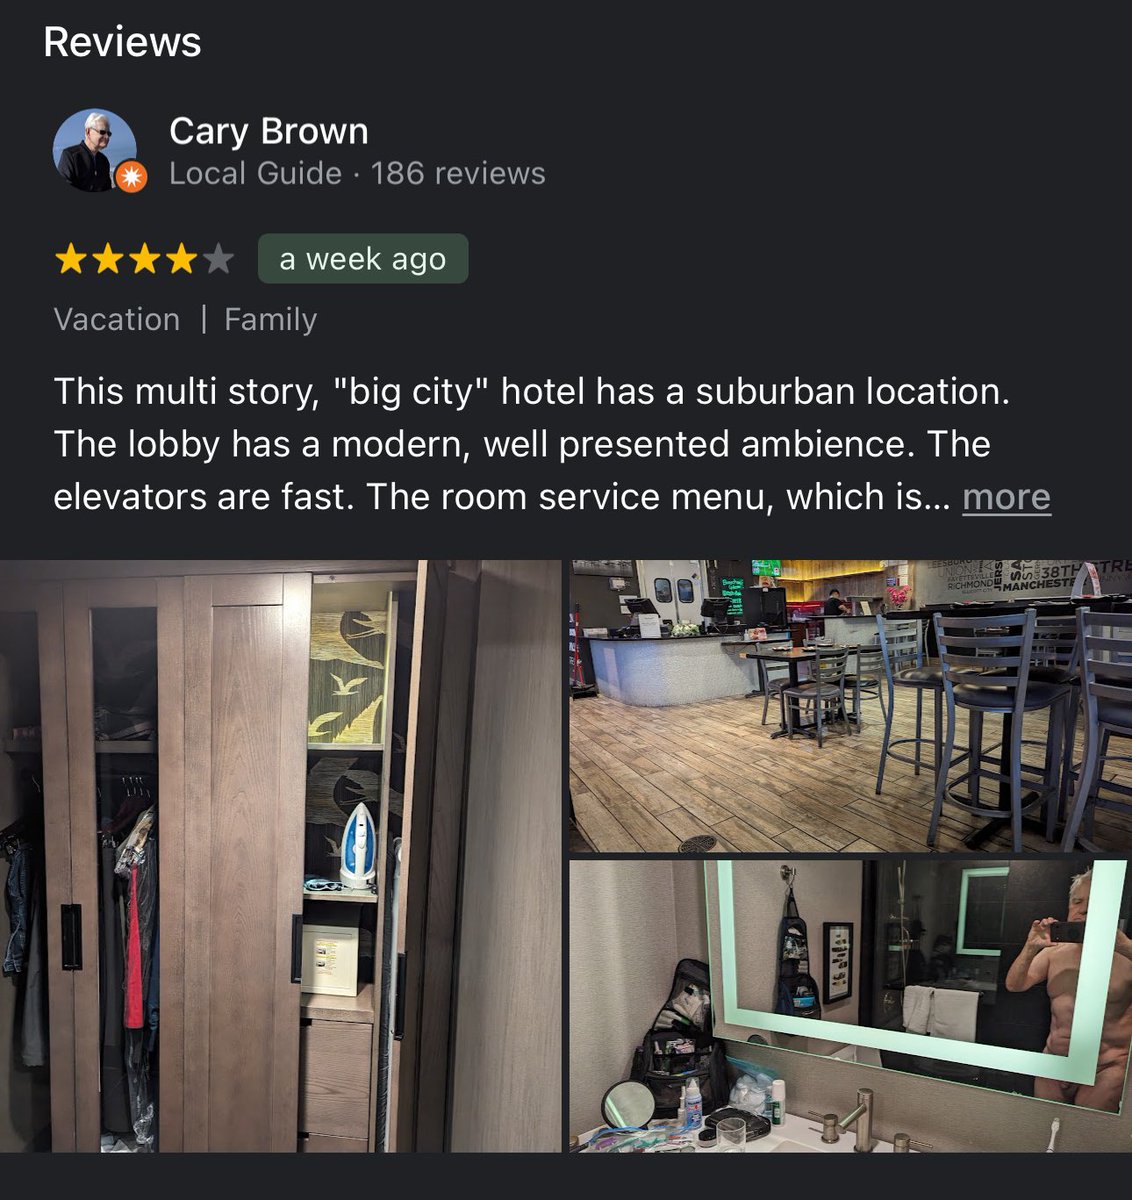 Searching reviews for hotels for an upcoming trip. 
Not sure if I want to stay in any room Cary Brown has stayed in. 
What’s wrong with people? 
#WheresWaldo
#googlereviews
#google
#alphabet